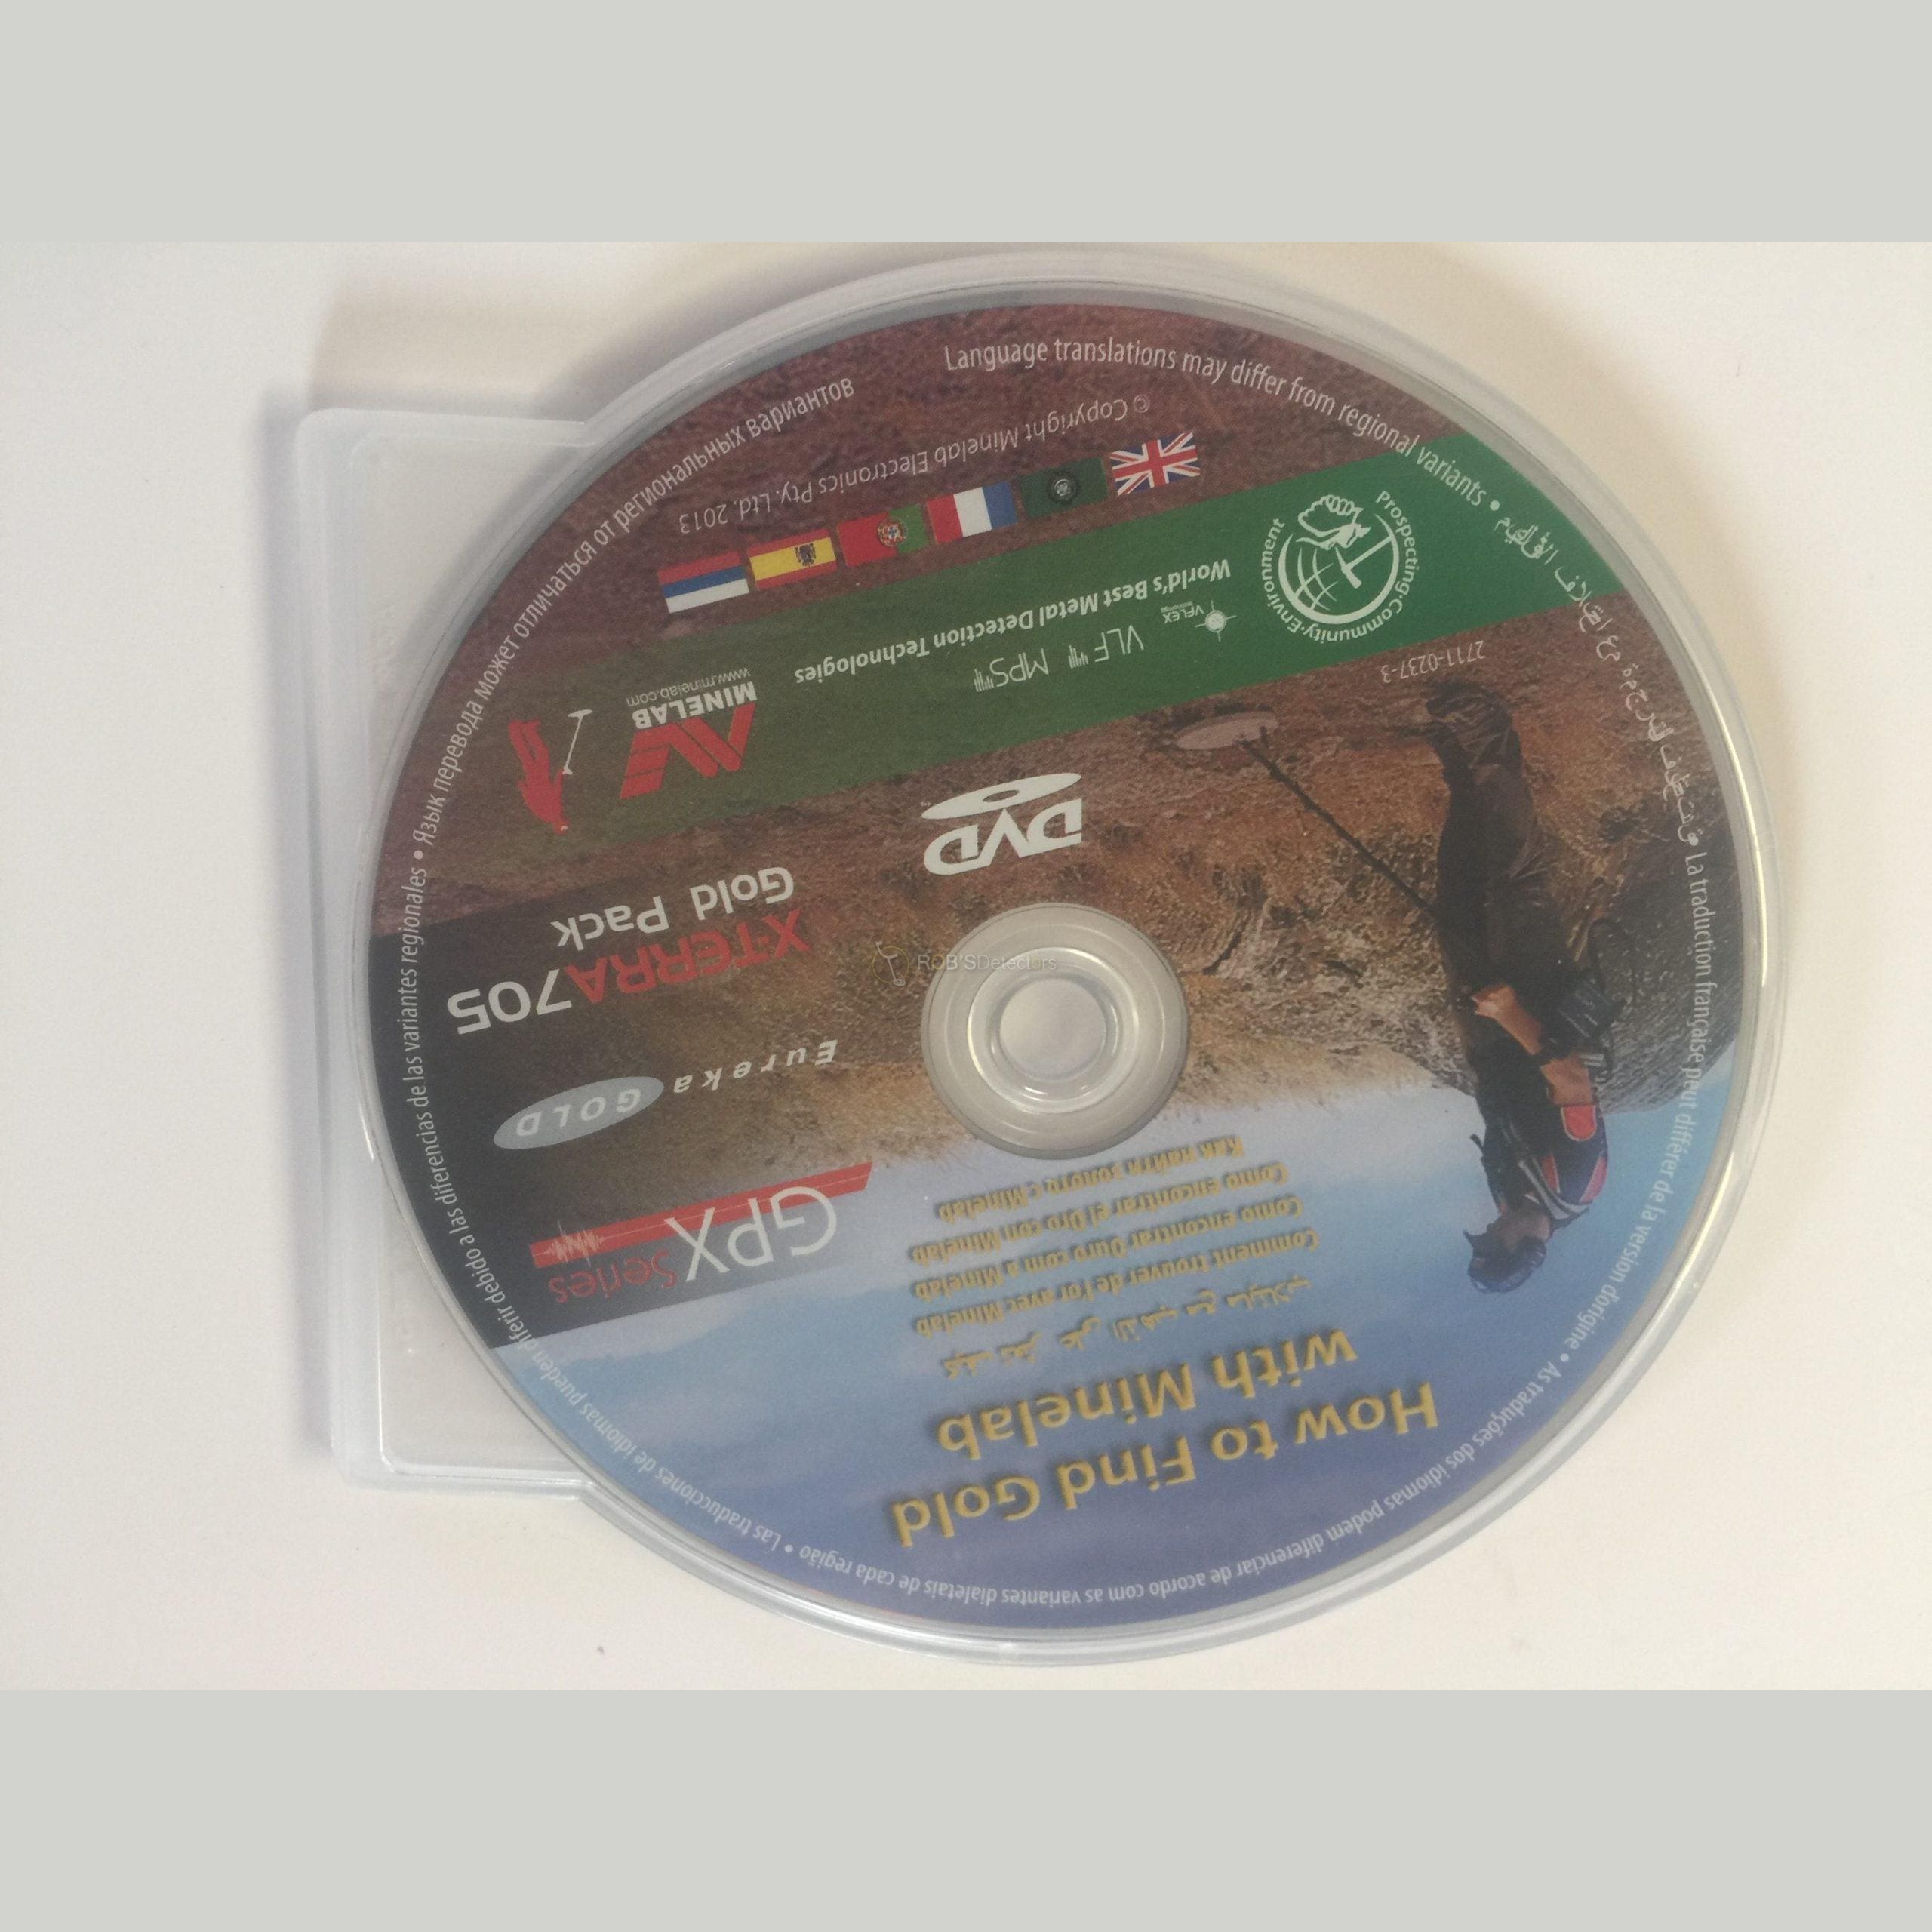 How to Find Gold with Minelab DVD